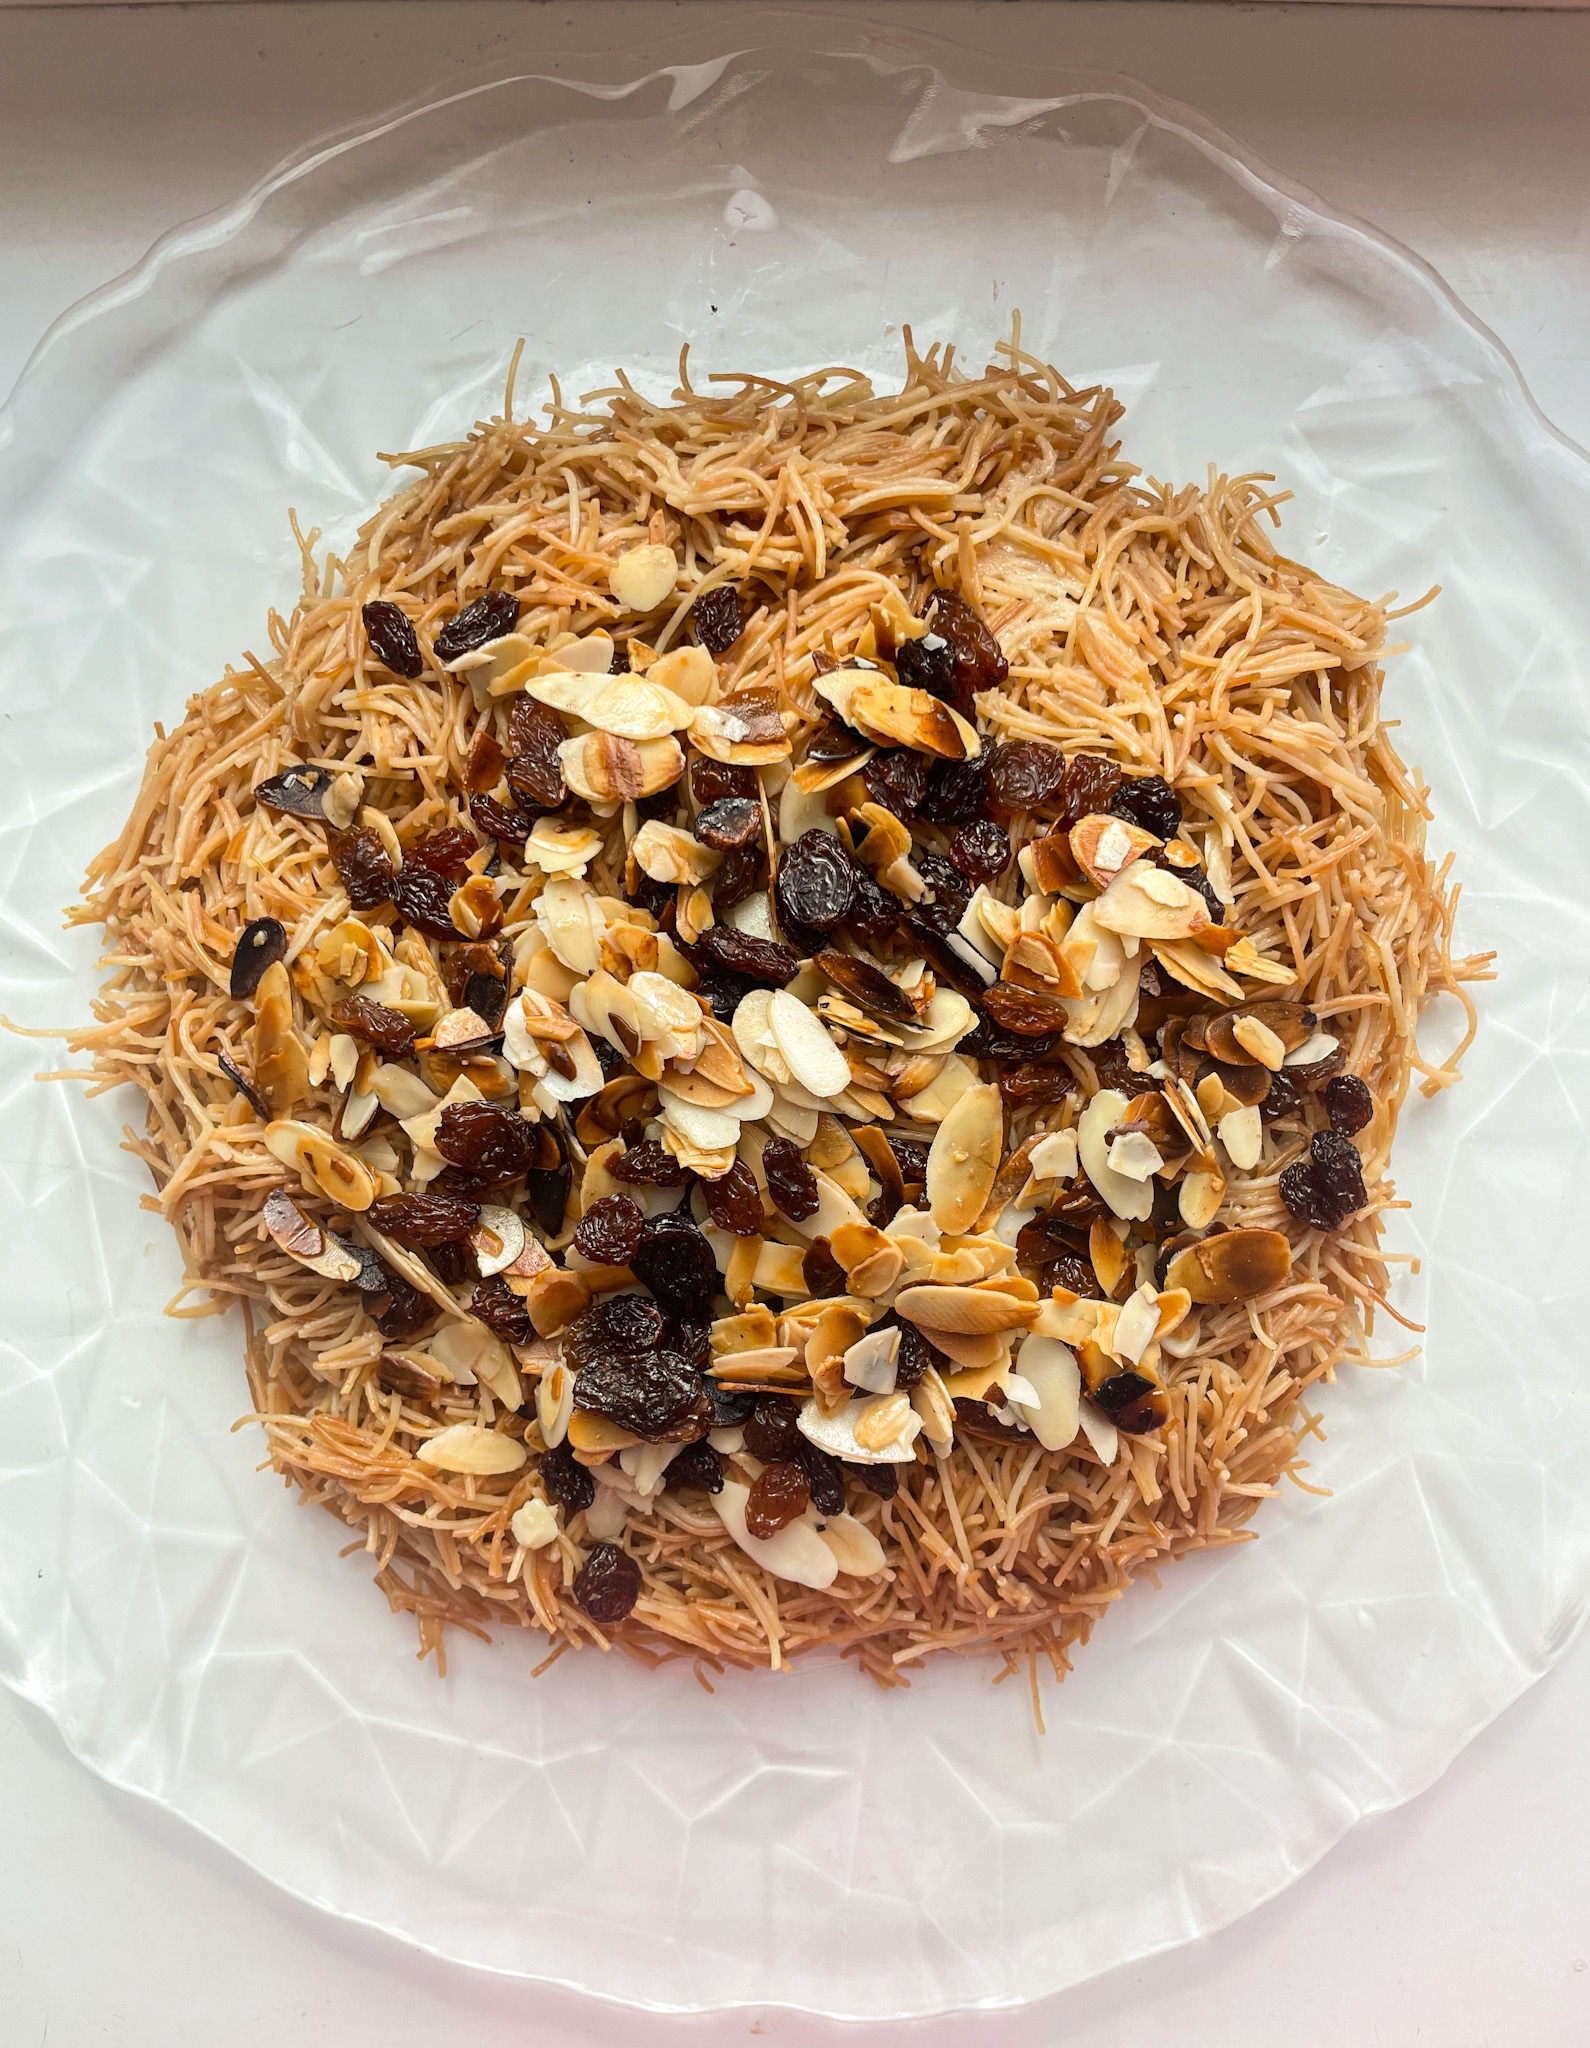 EASY VERMICELLI PASTA WITH NUTS